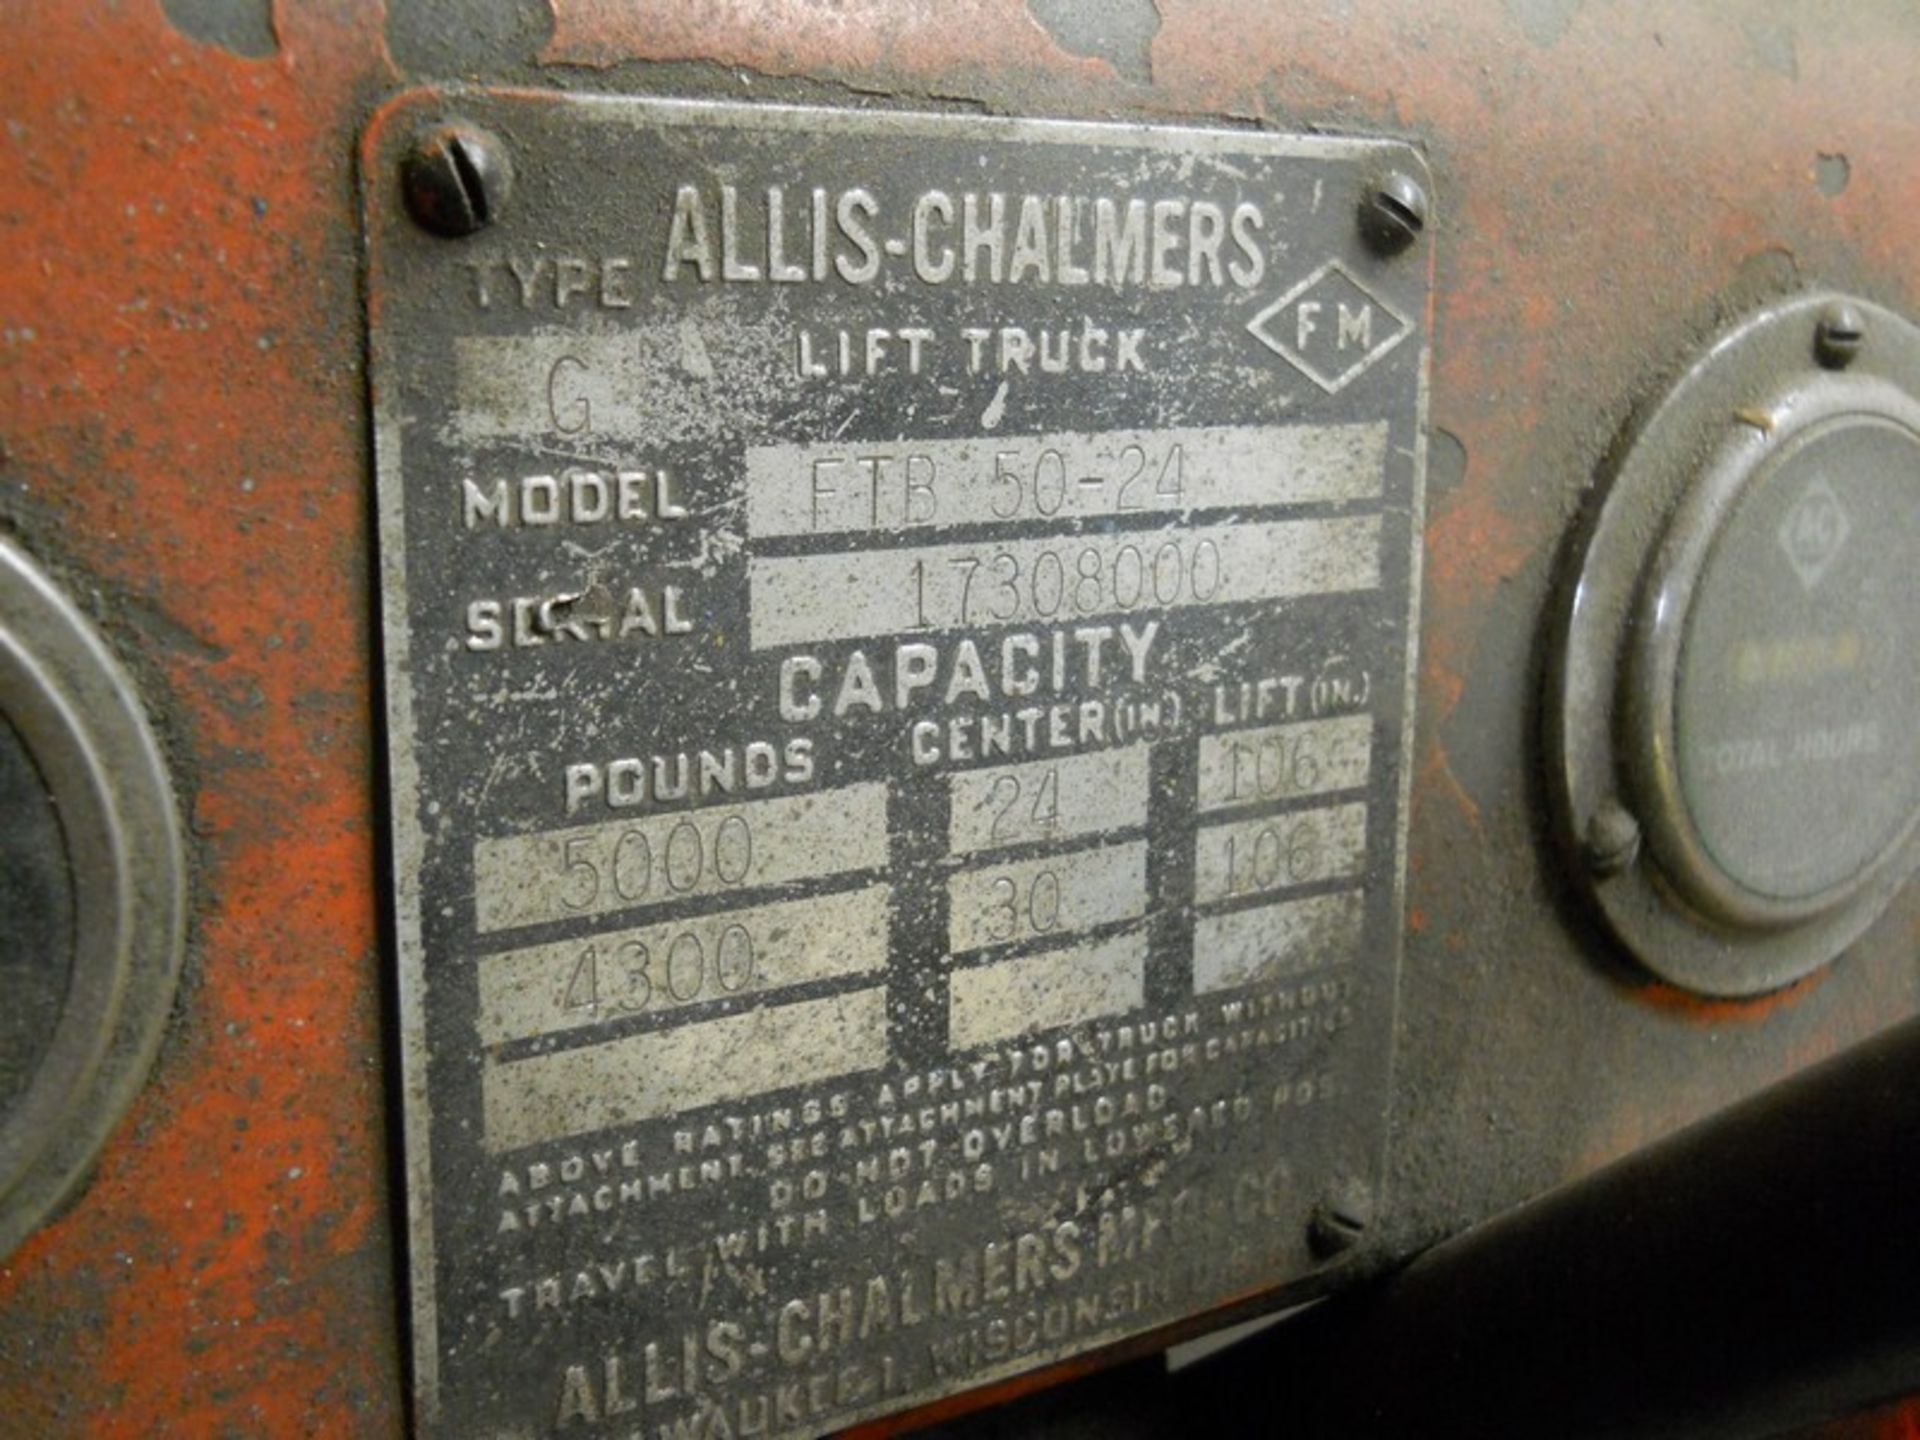 Allis Chalmers 5,000 lb. Cap. Model FTB 50-24 Gas Fork Lift Truck, S/N: 17308000; with 2-Stage Mast, - Image 10 of 10